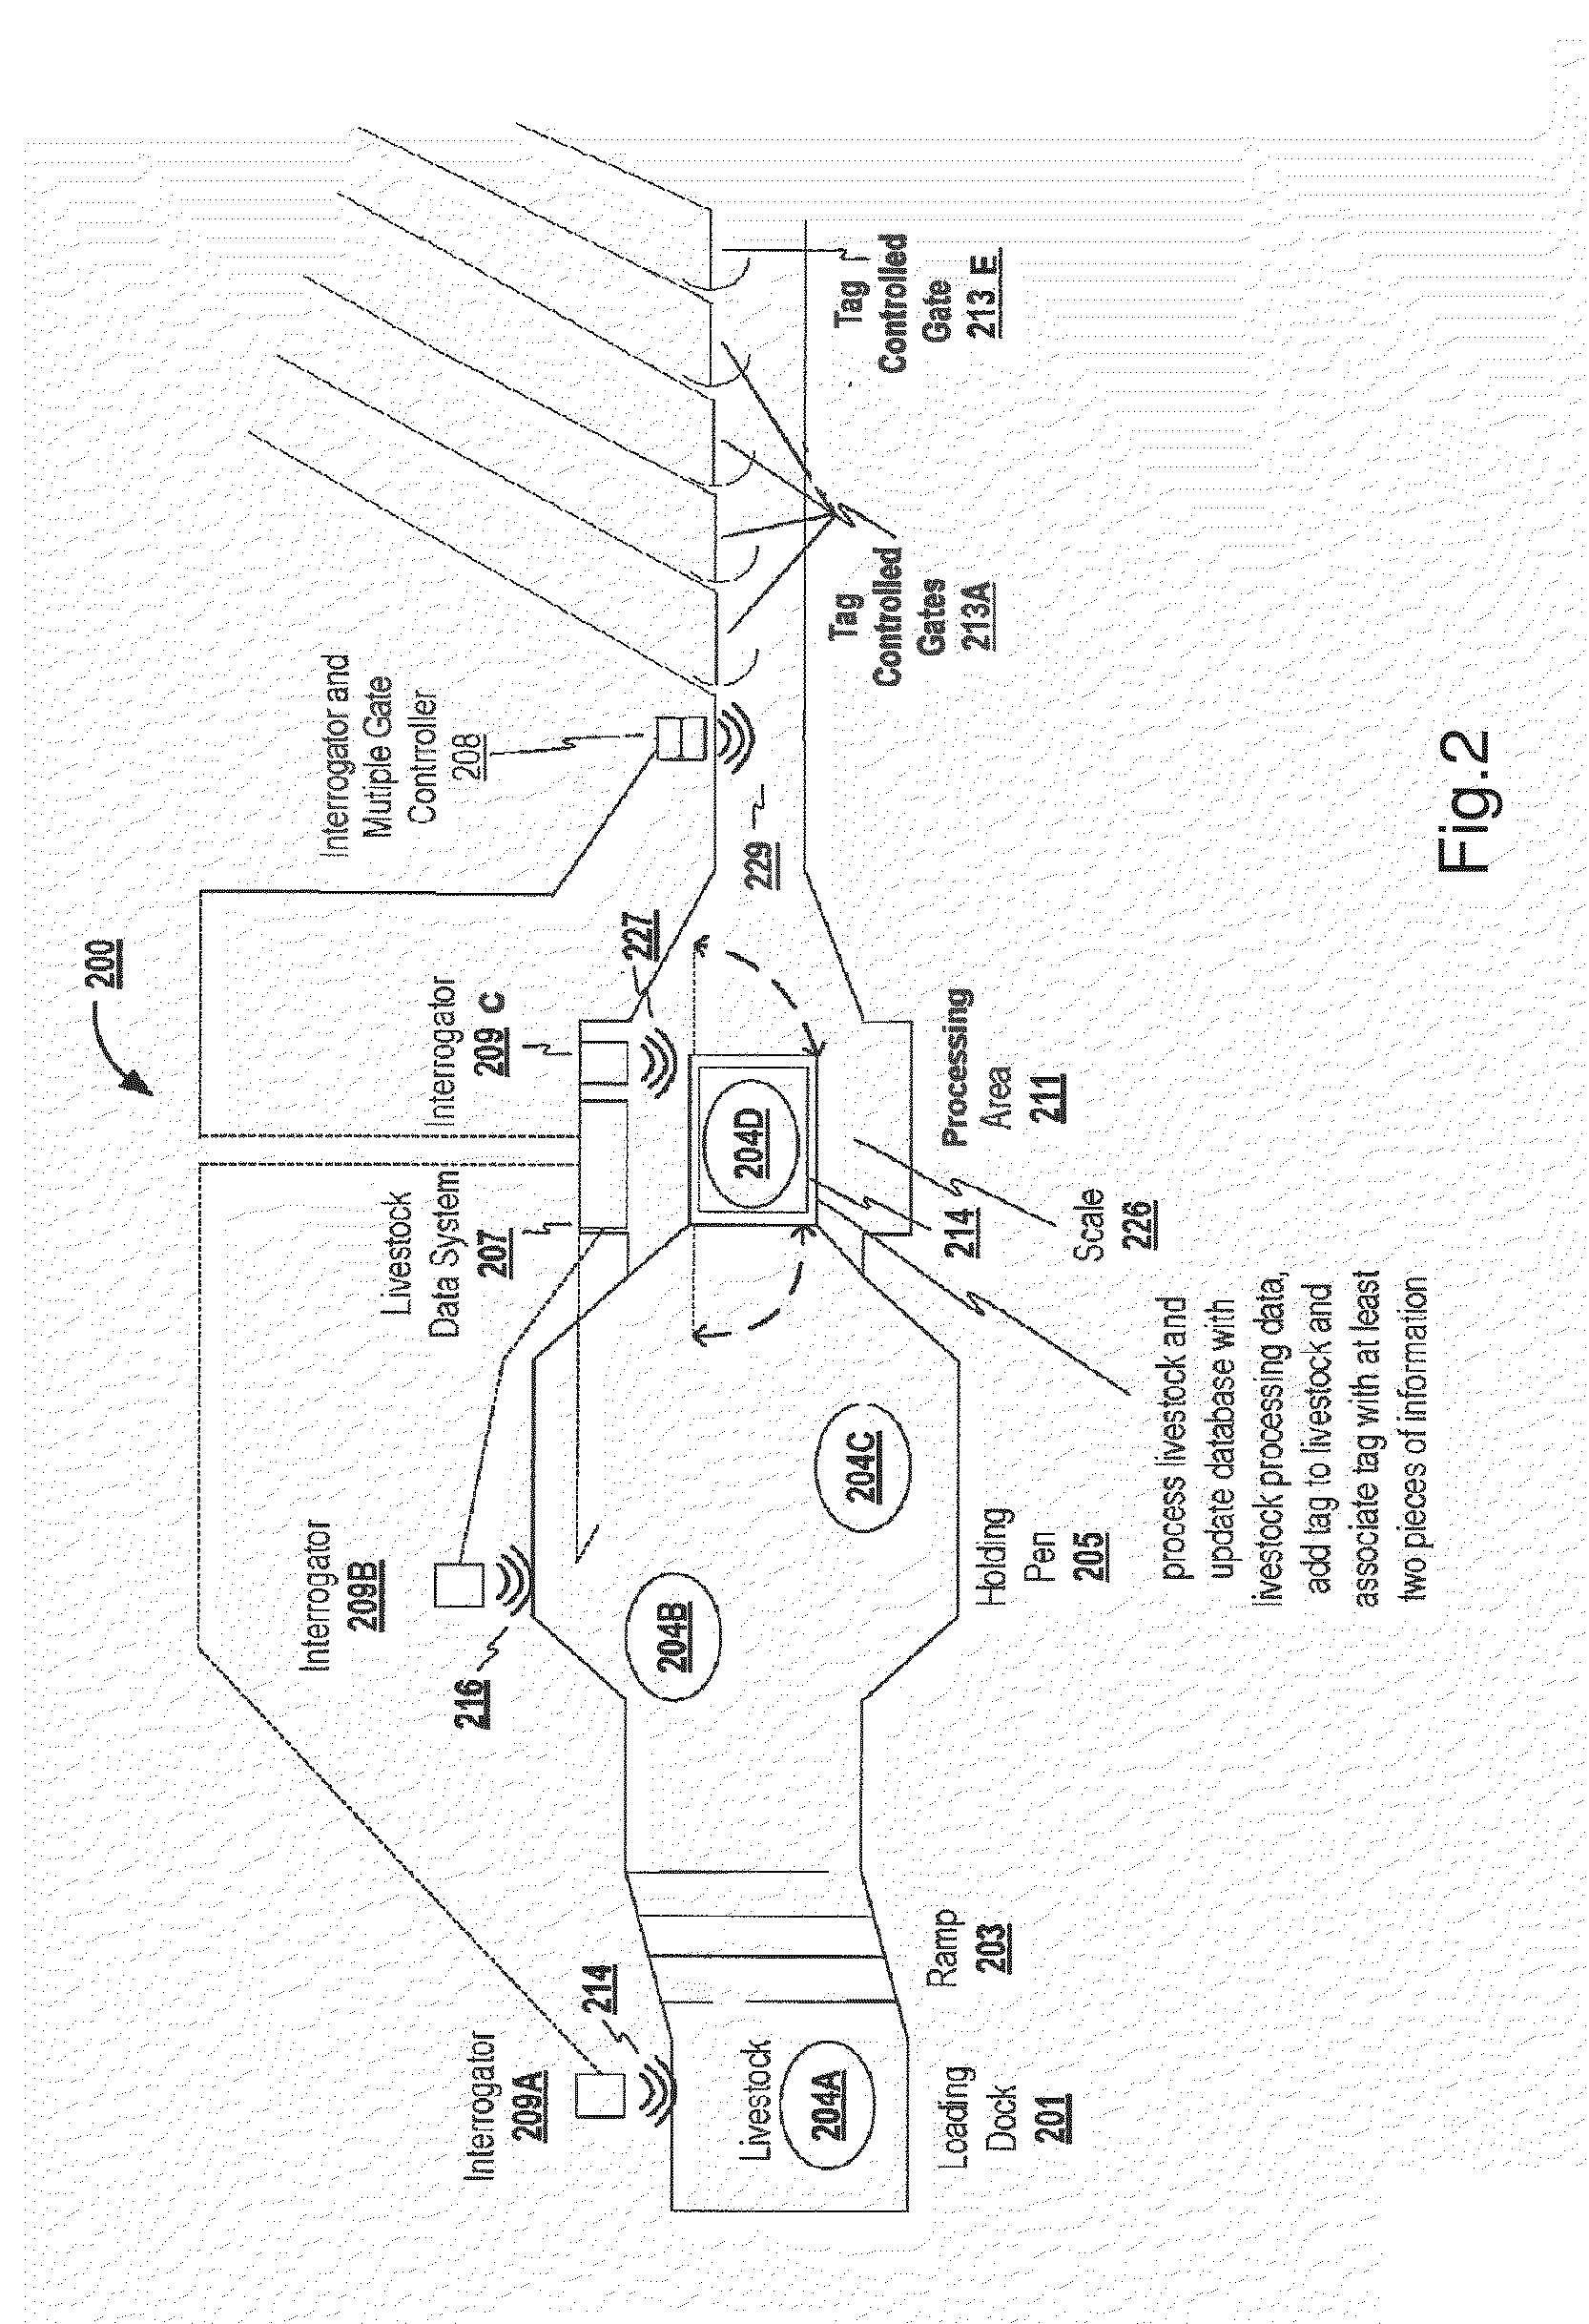 Method and apparatus for improved monitoring and managing of livestock